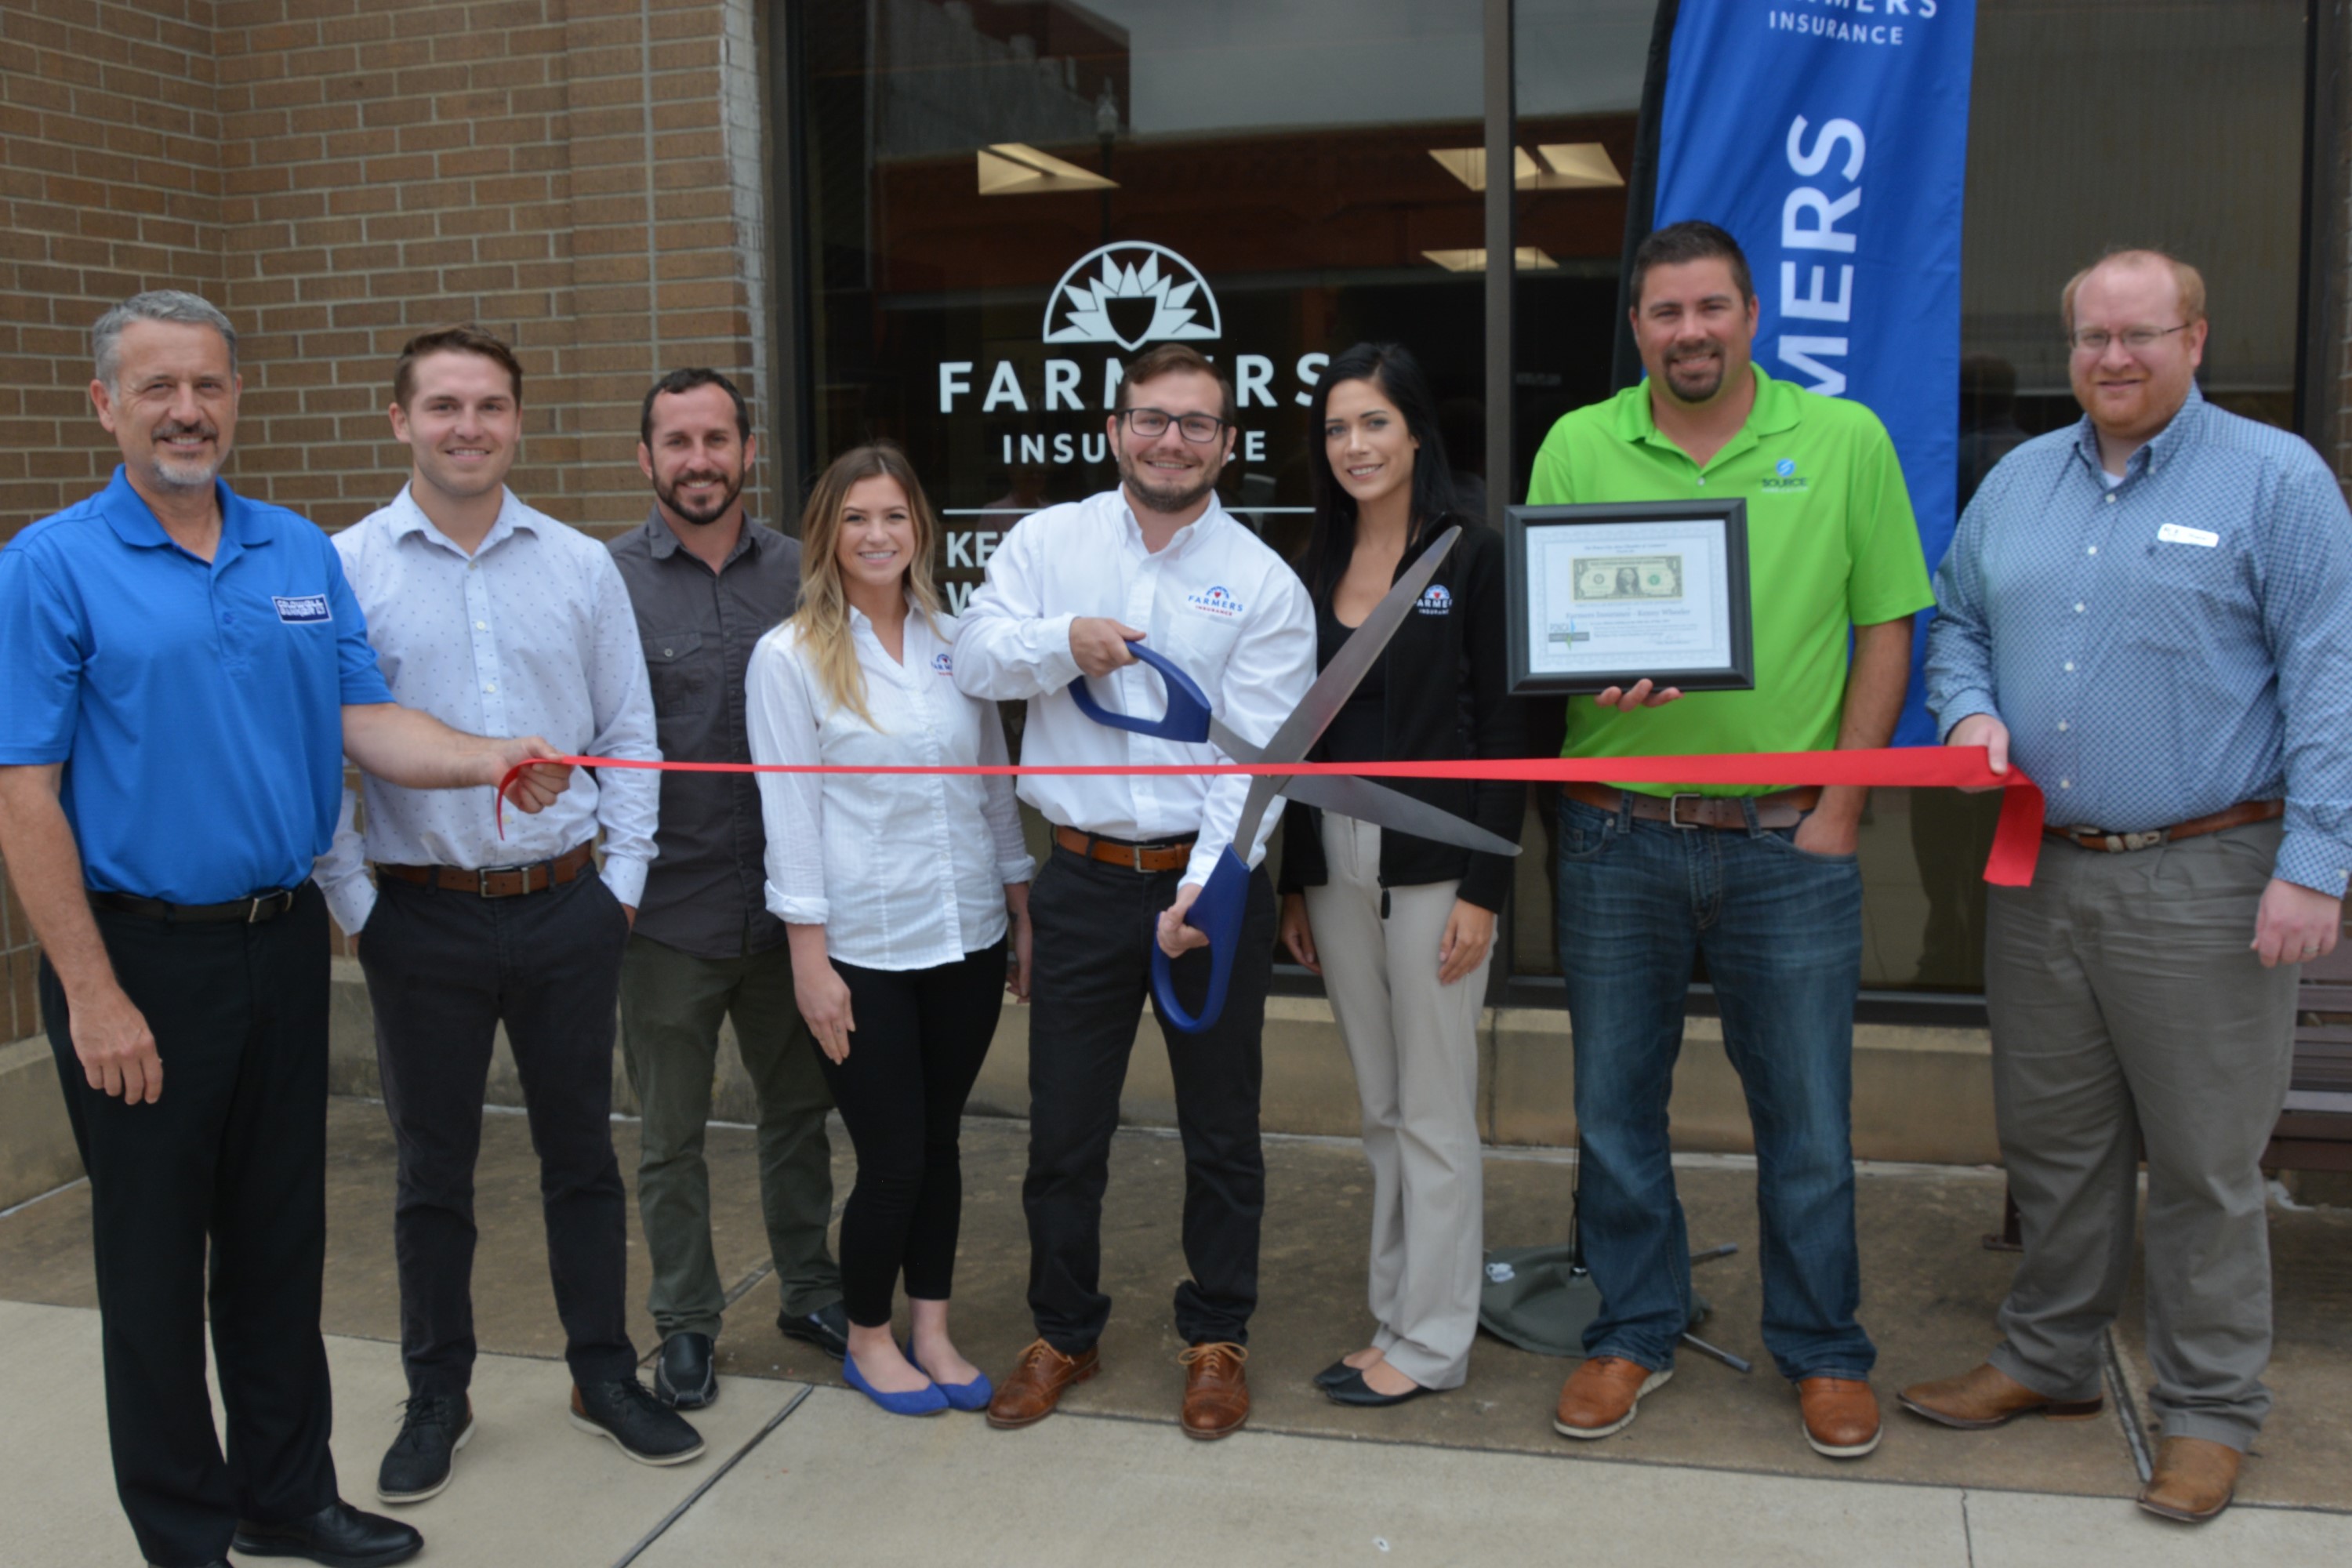 Ribbon-cutting held for Kenny Wheeler’s Farmers Insurance